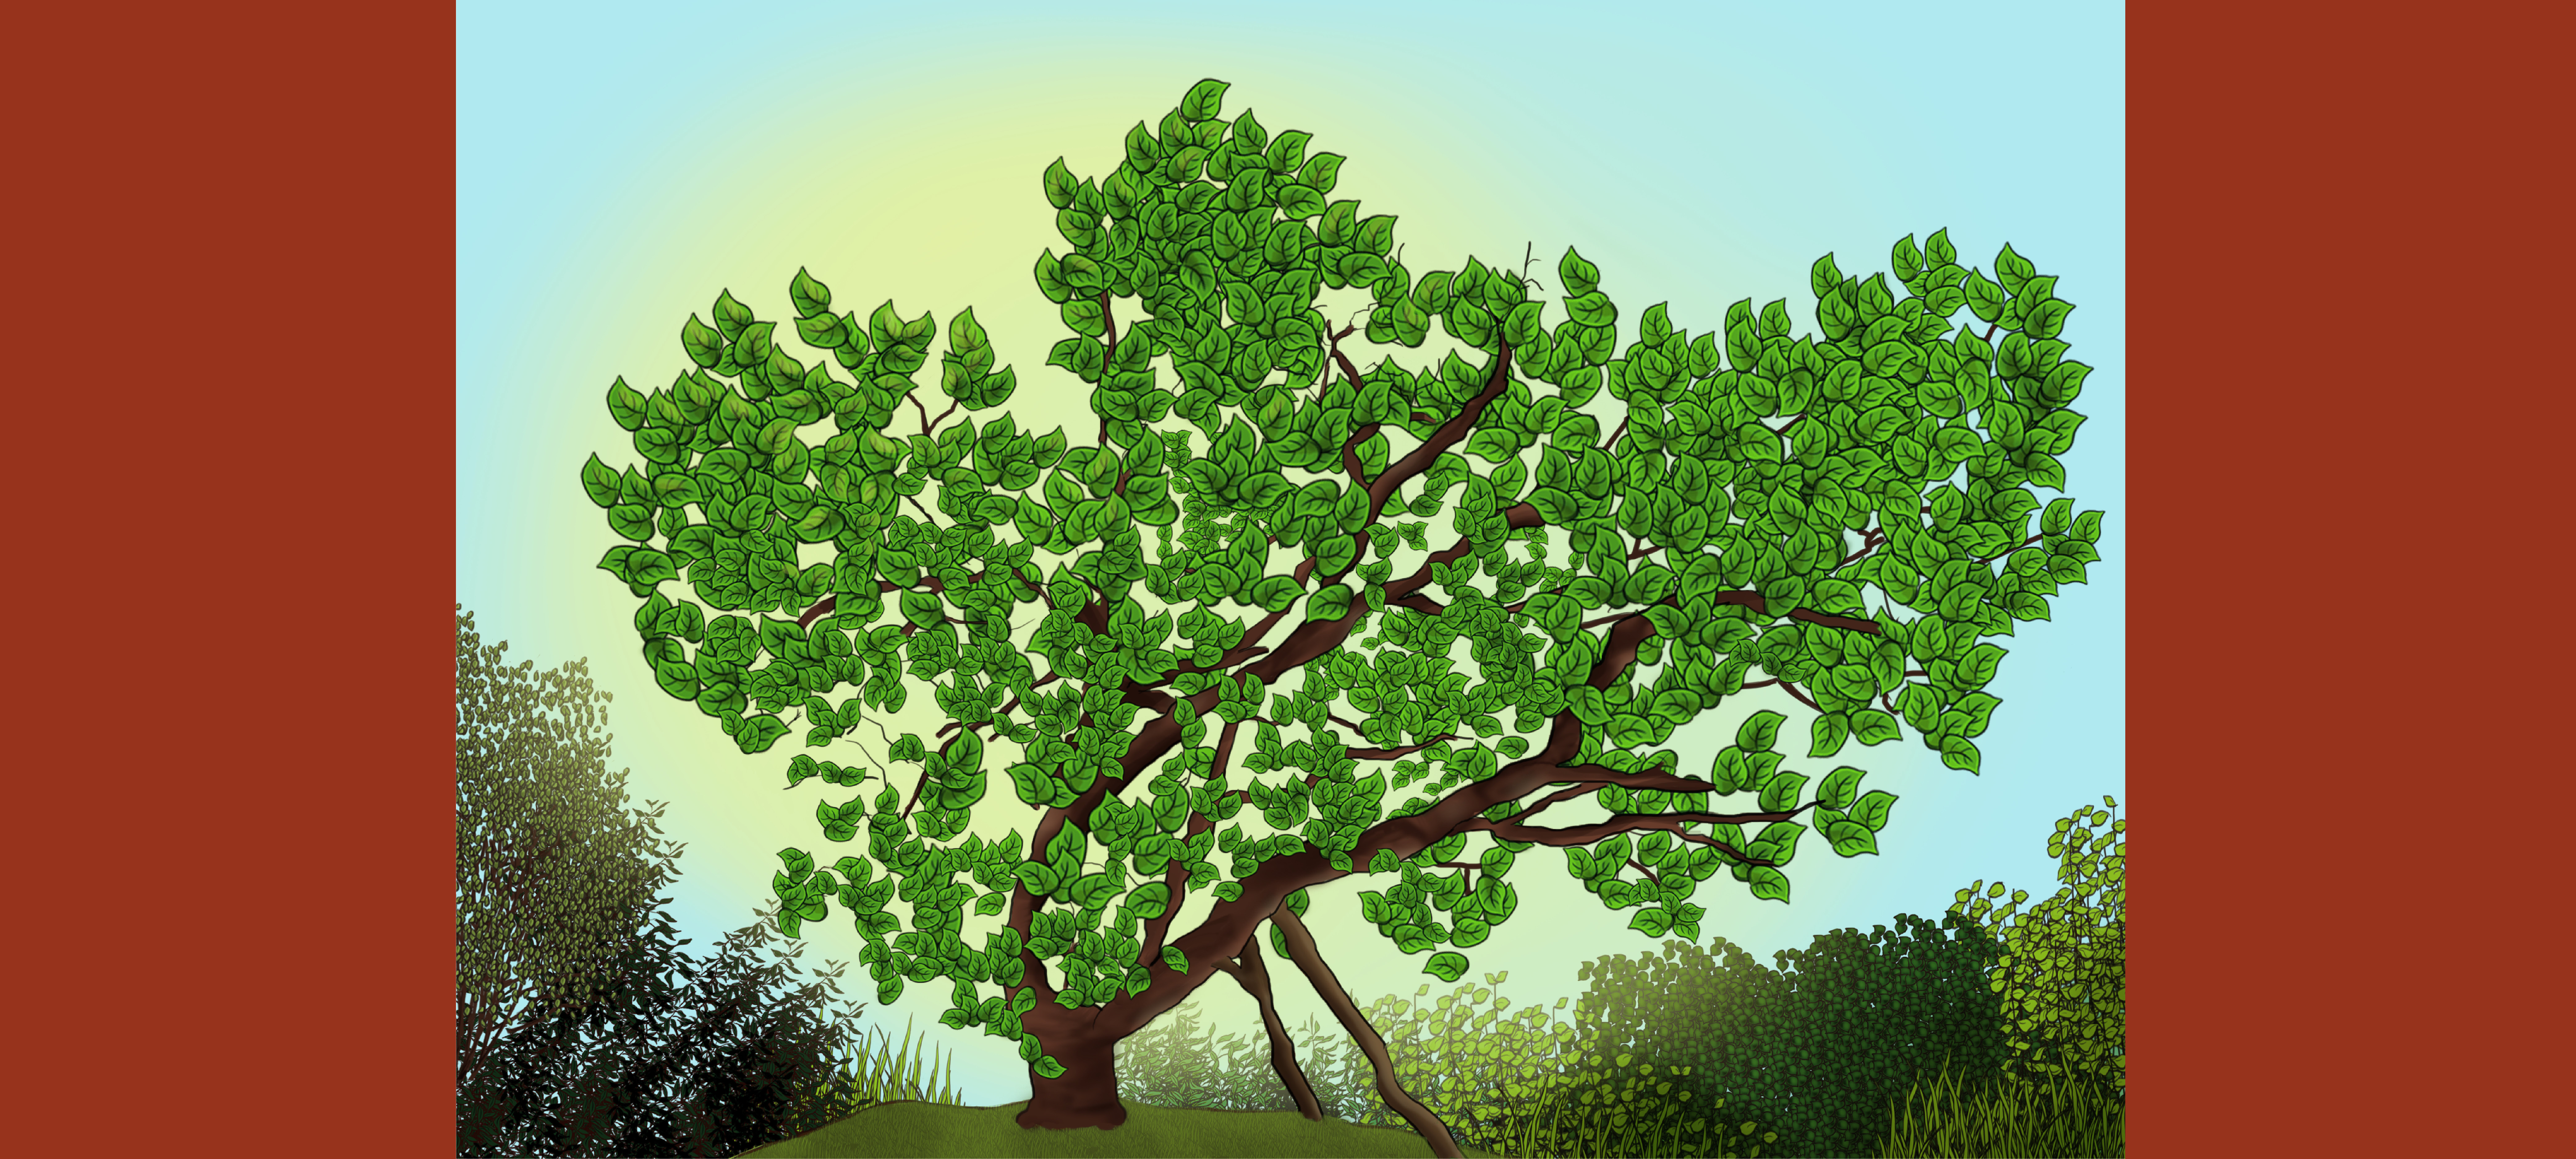 Mulberry tree virtual rhyme time 3-3.30pm